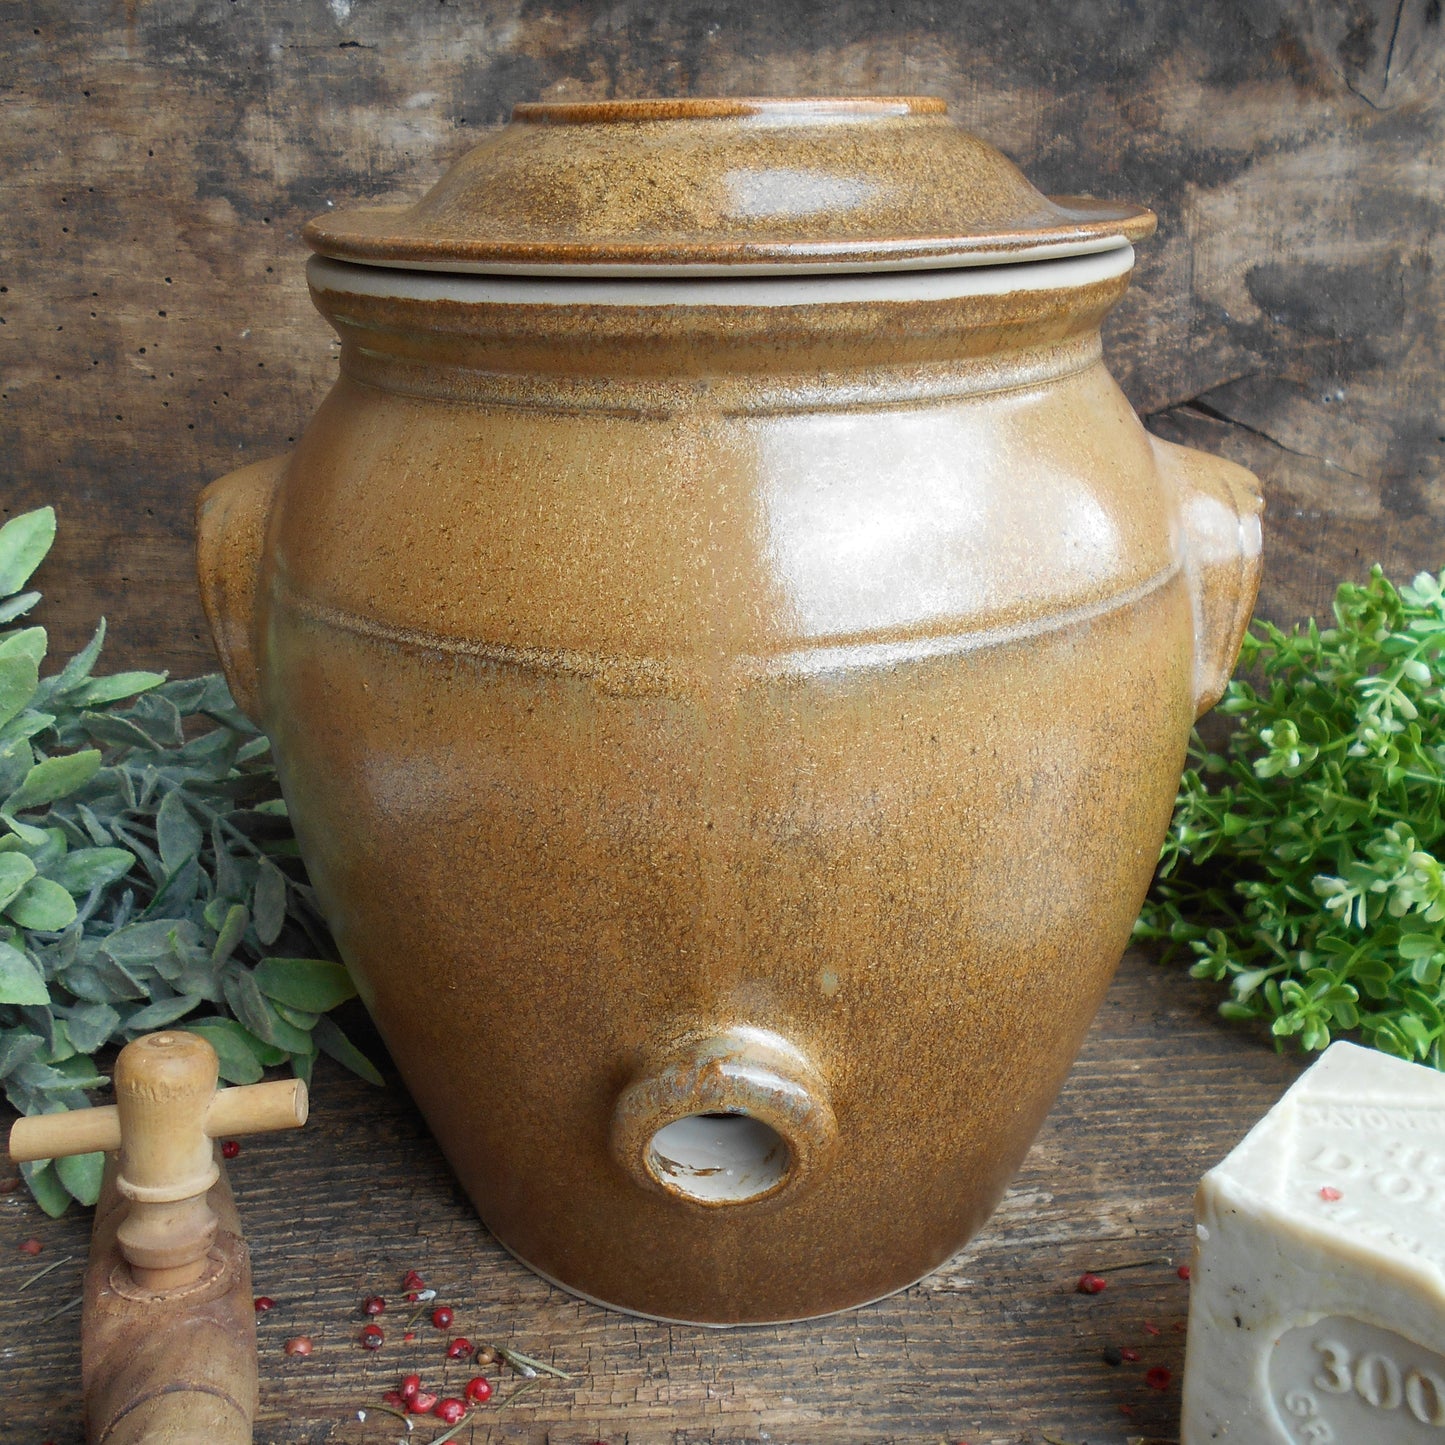 Large Stoneware Oil Jar with Lid, Handles and Tap/Cork Opening. from Tiggy & Pip - €159.00! Shop now at Tiggy and Pip